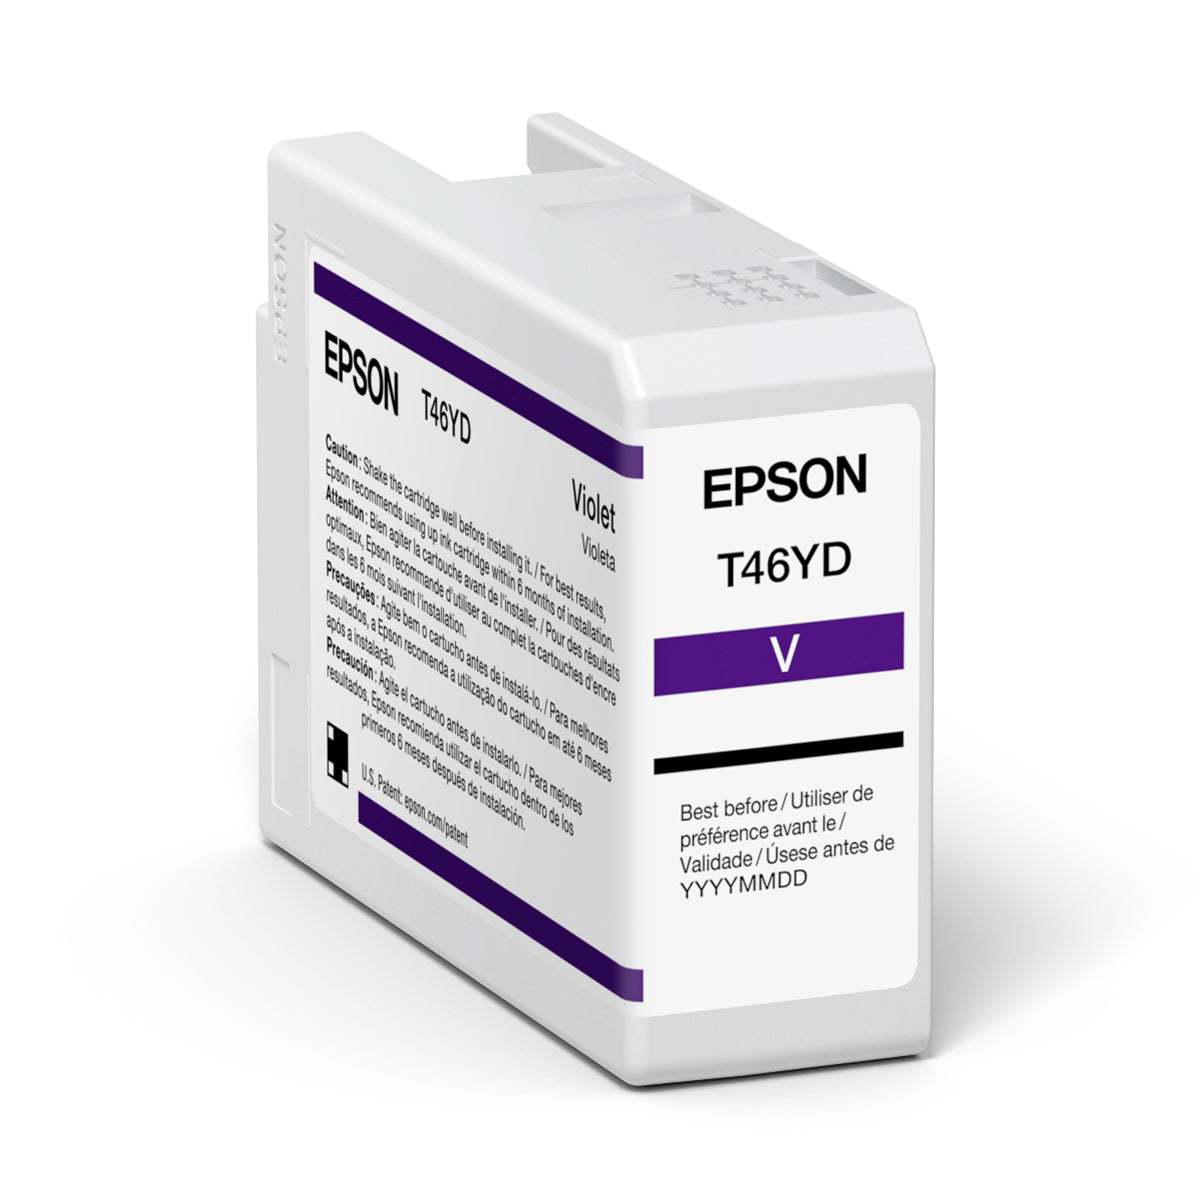 Epson T46YD00 P900 Ultrachrome HD Violet Ink